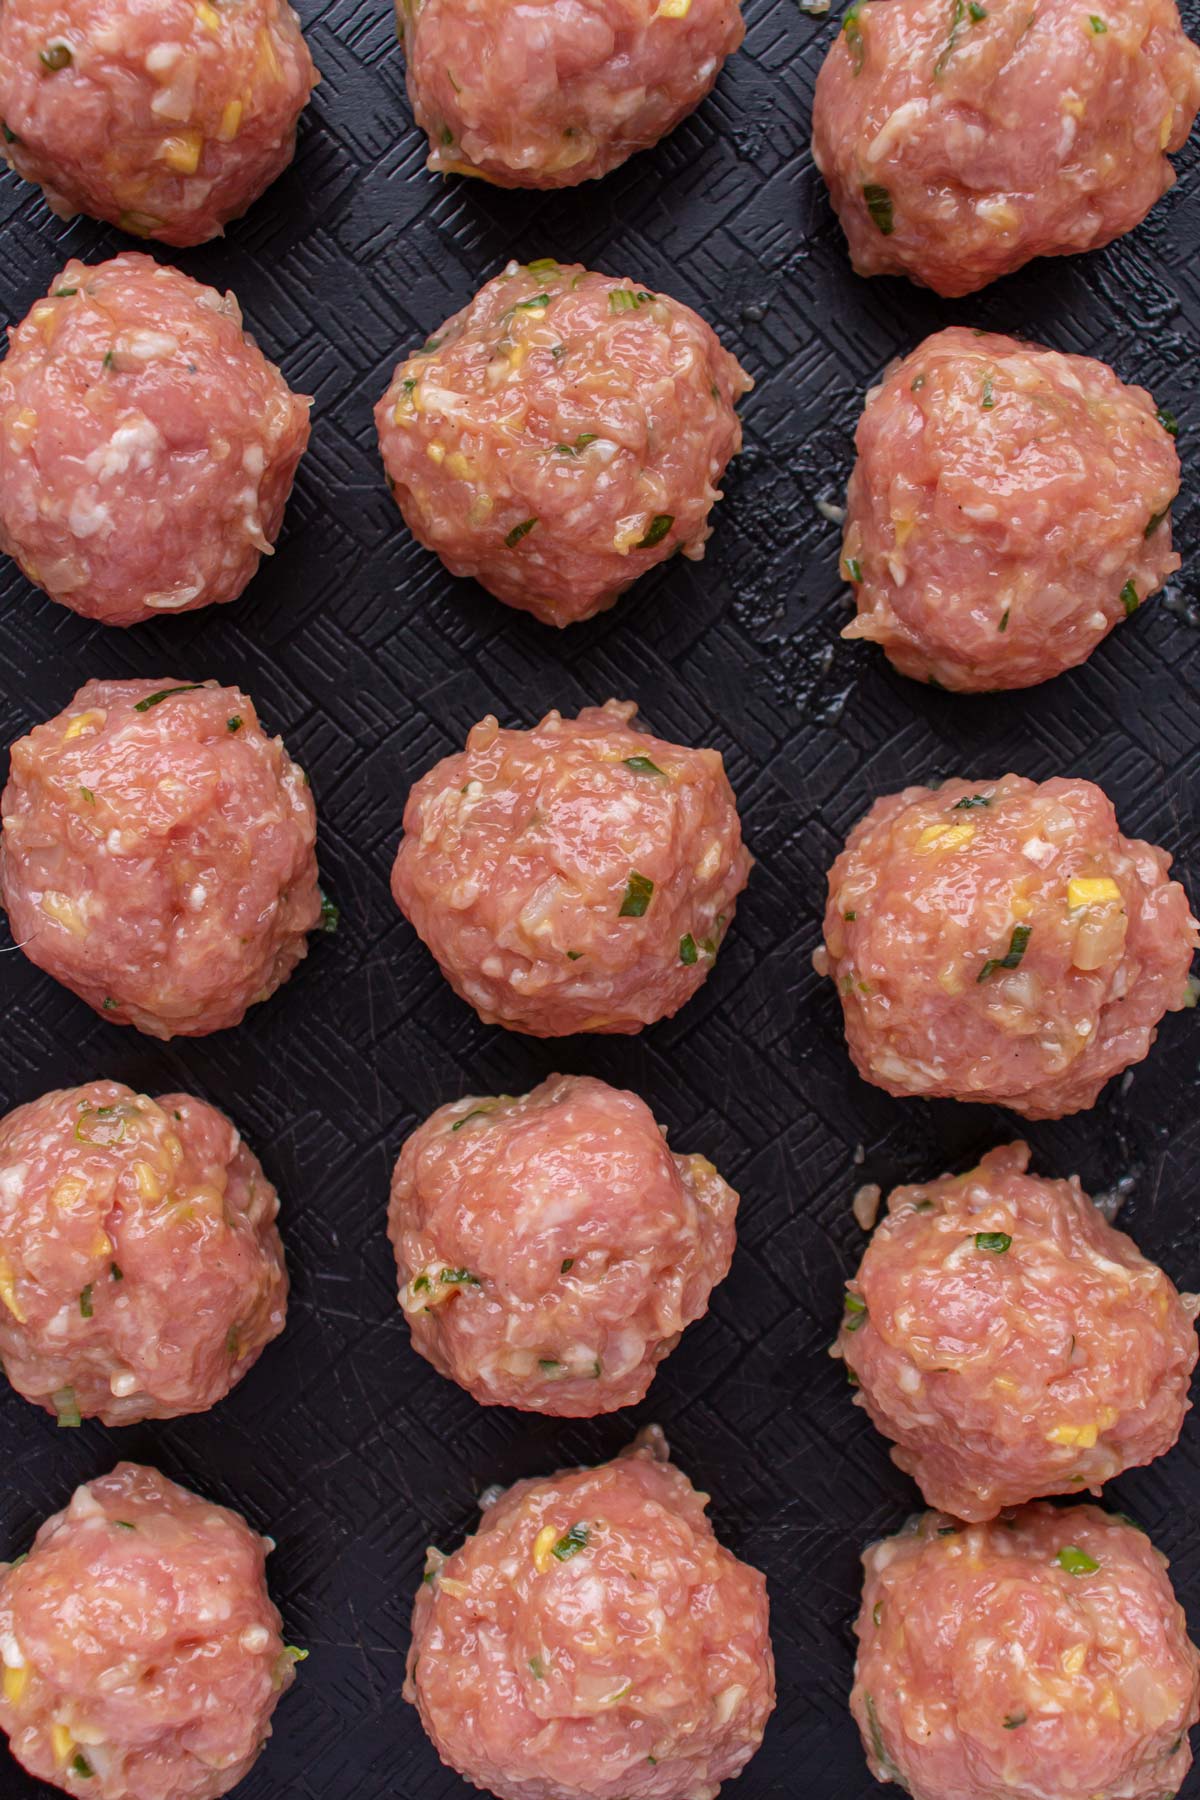 Small uncooked meatballs arranged in rows on a black surface.